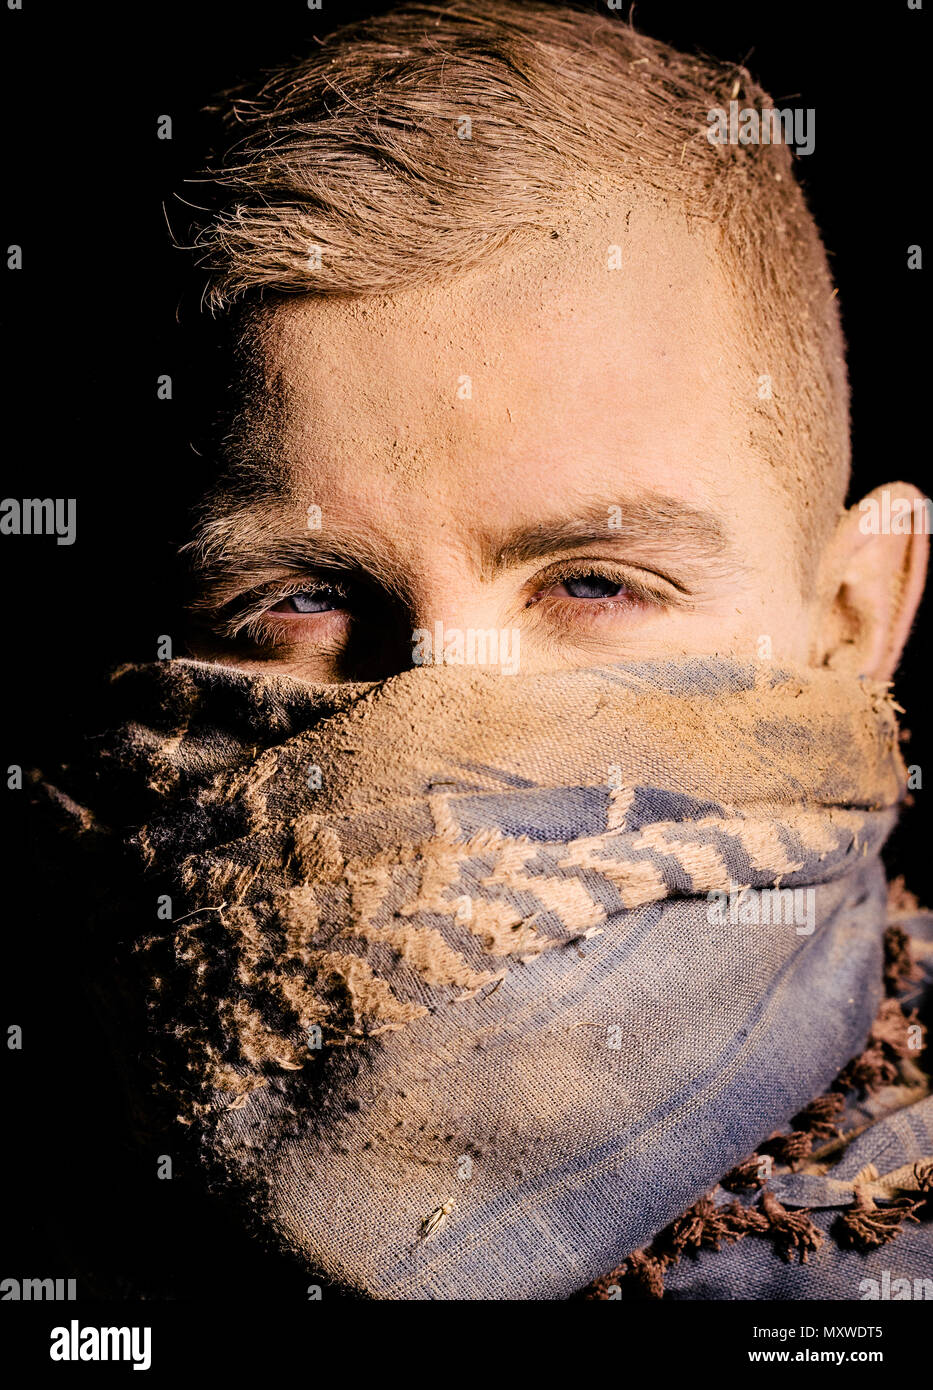 Jordan Kern High Resolution Stock Photography and Images - Alamy